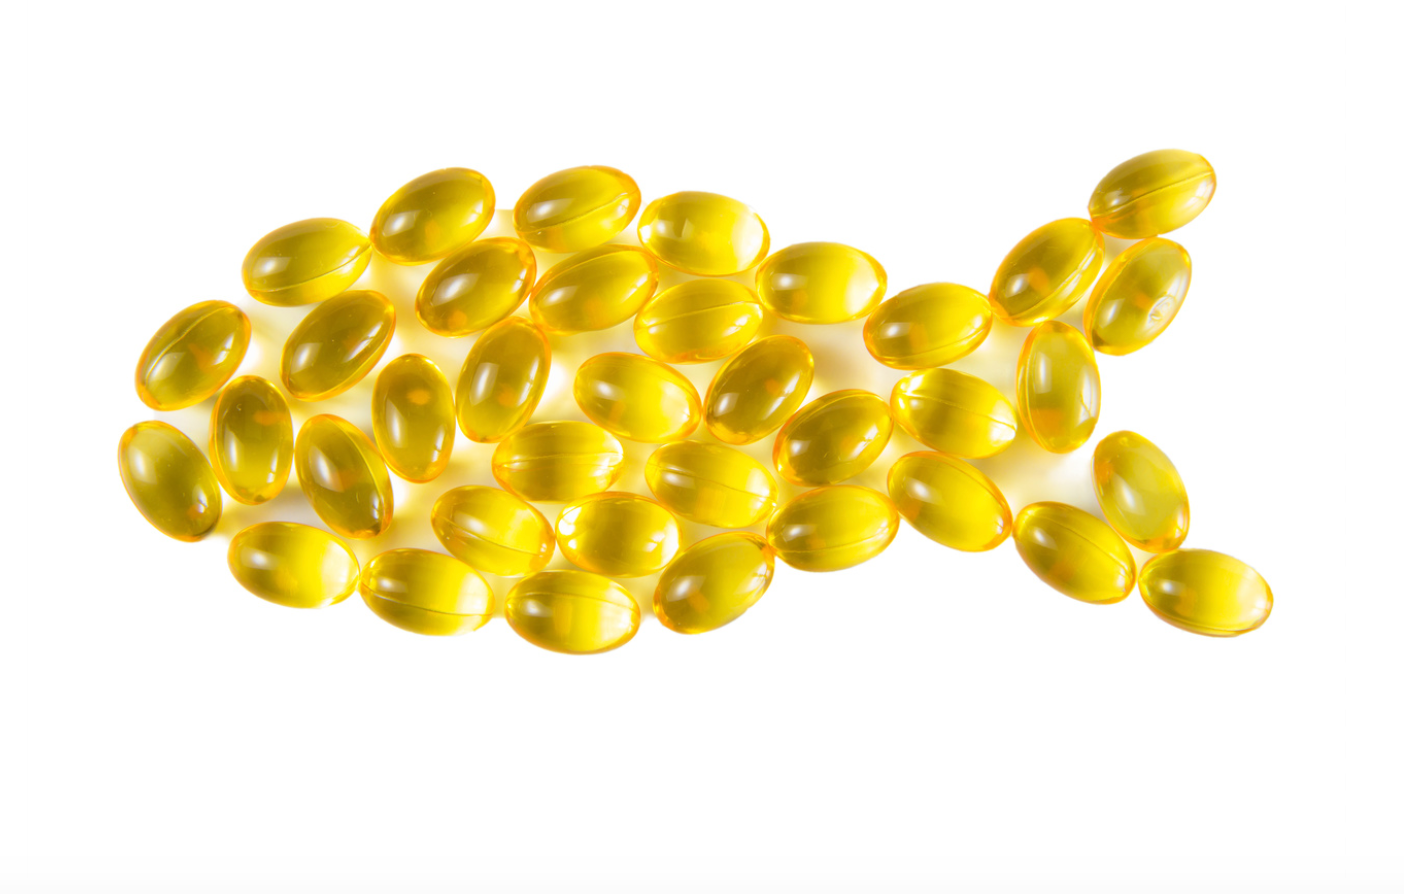 Study: New Device More Effective in Extracting Omega-3s From Fish Oil